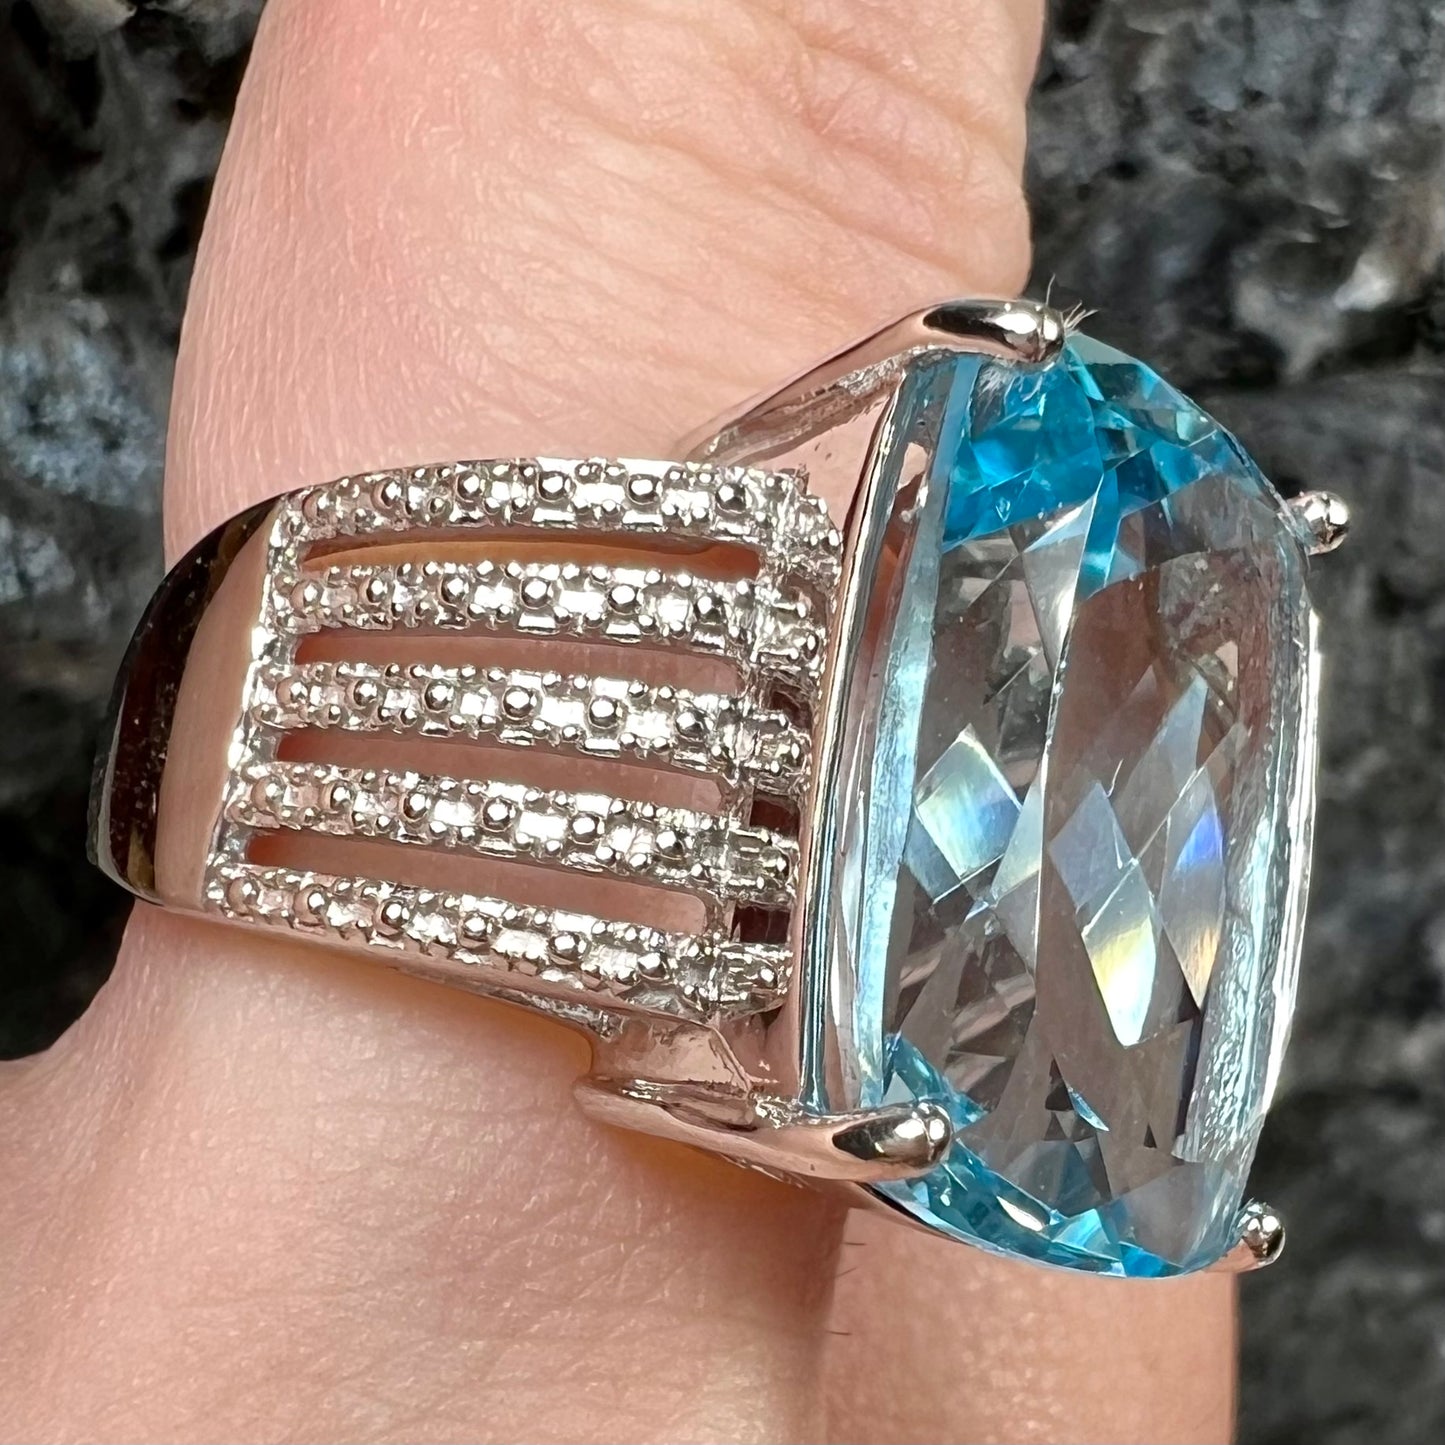 A sterling silver ring prong set with a large, cushion cut sky blue topaz stone.  The shank has been textured to mimic accent stones.